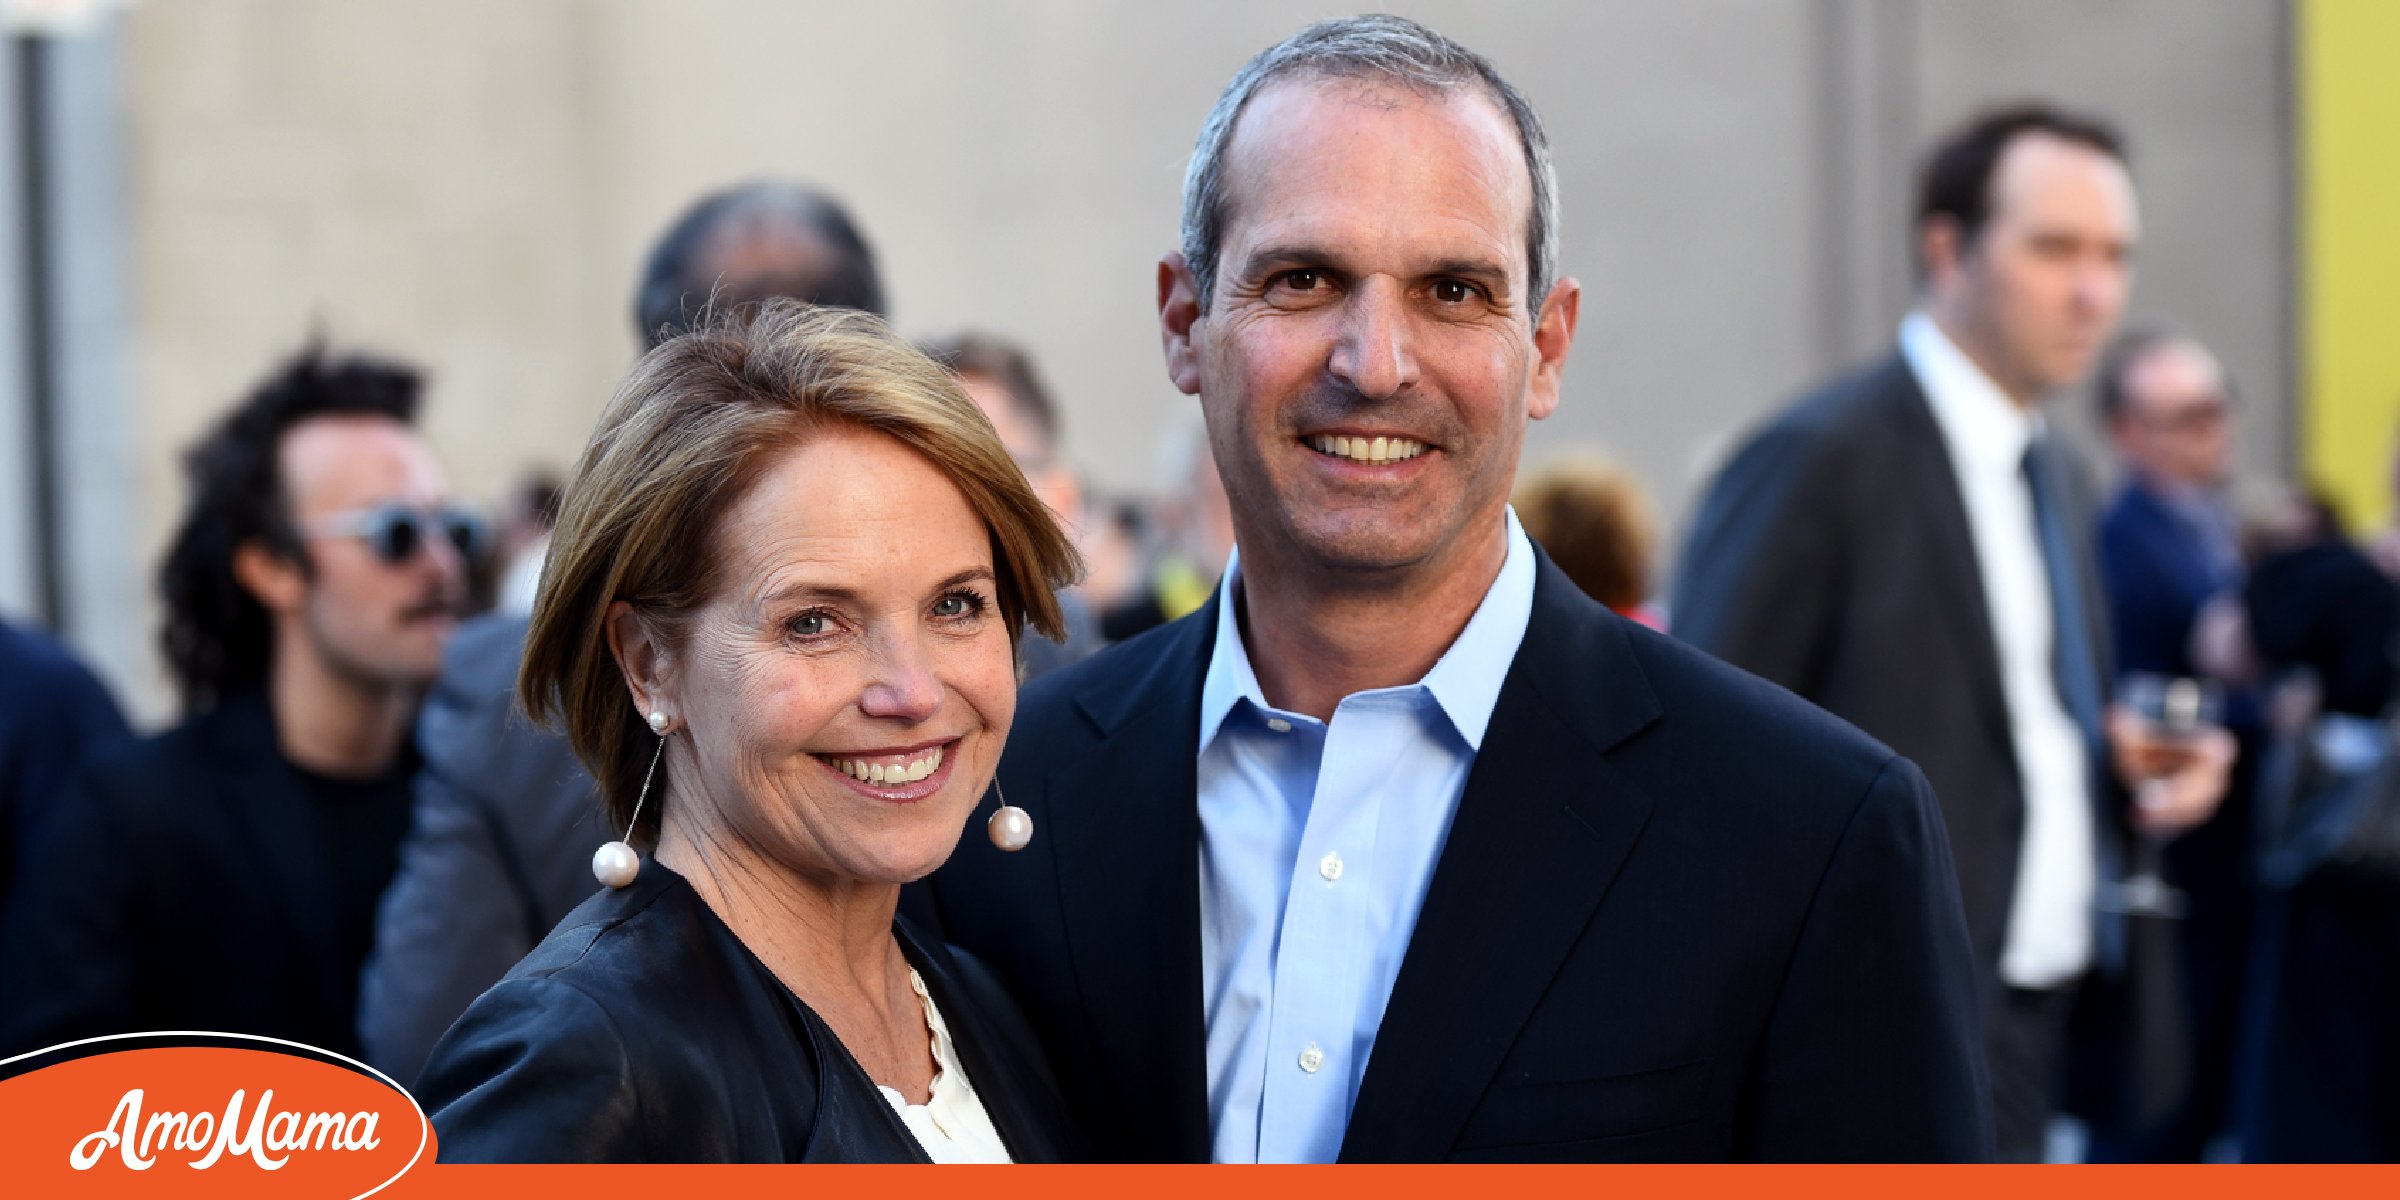 John Molner Is Katie Couric's Husband Who She Fell in Love with at First Sight